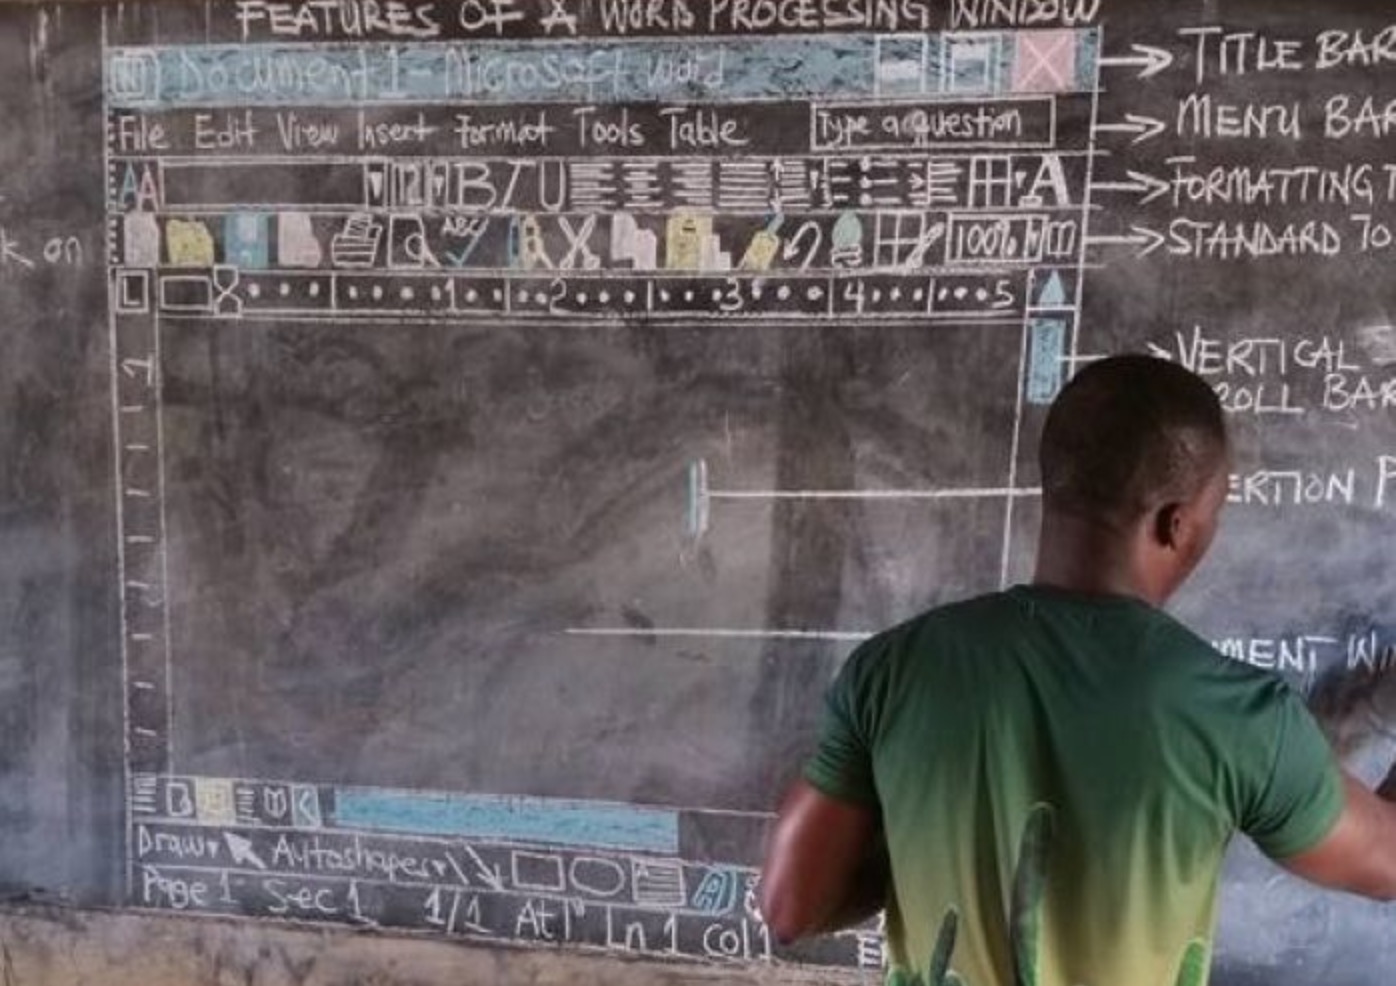 Ghanaian teacher Richard Appiah Akoto teaches his students how to use Microsoft Word by drawing the entire screen on a blackboard. PHOTO: Facebook/Owura Kwadwo Hottish